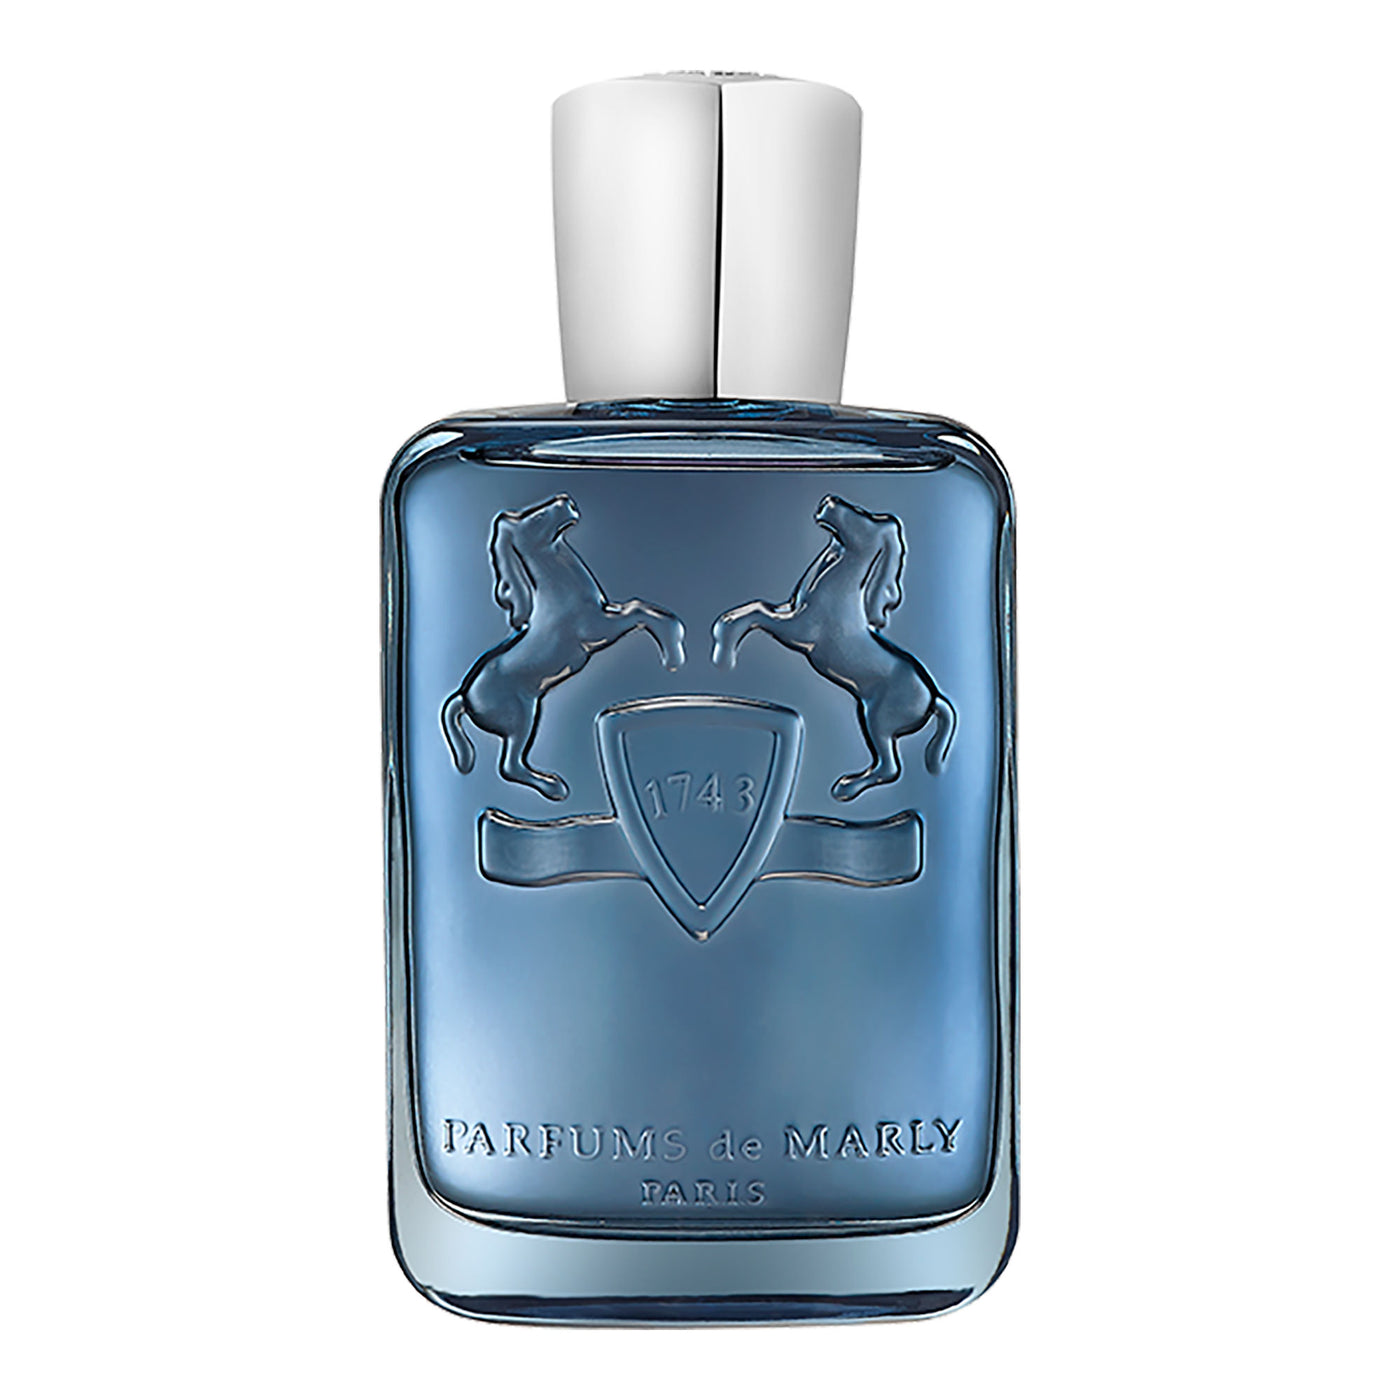 Parfums de Marly Sedley - 125ml - Gharyal by Collectibles 